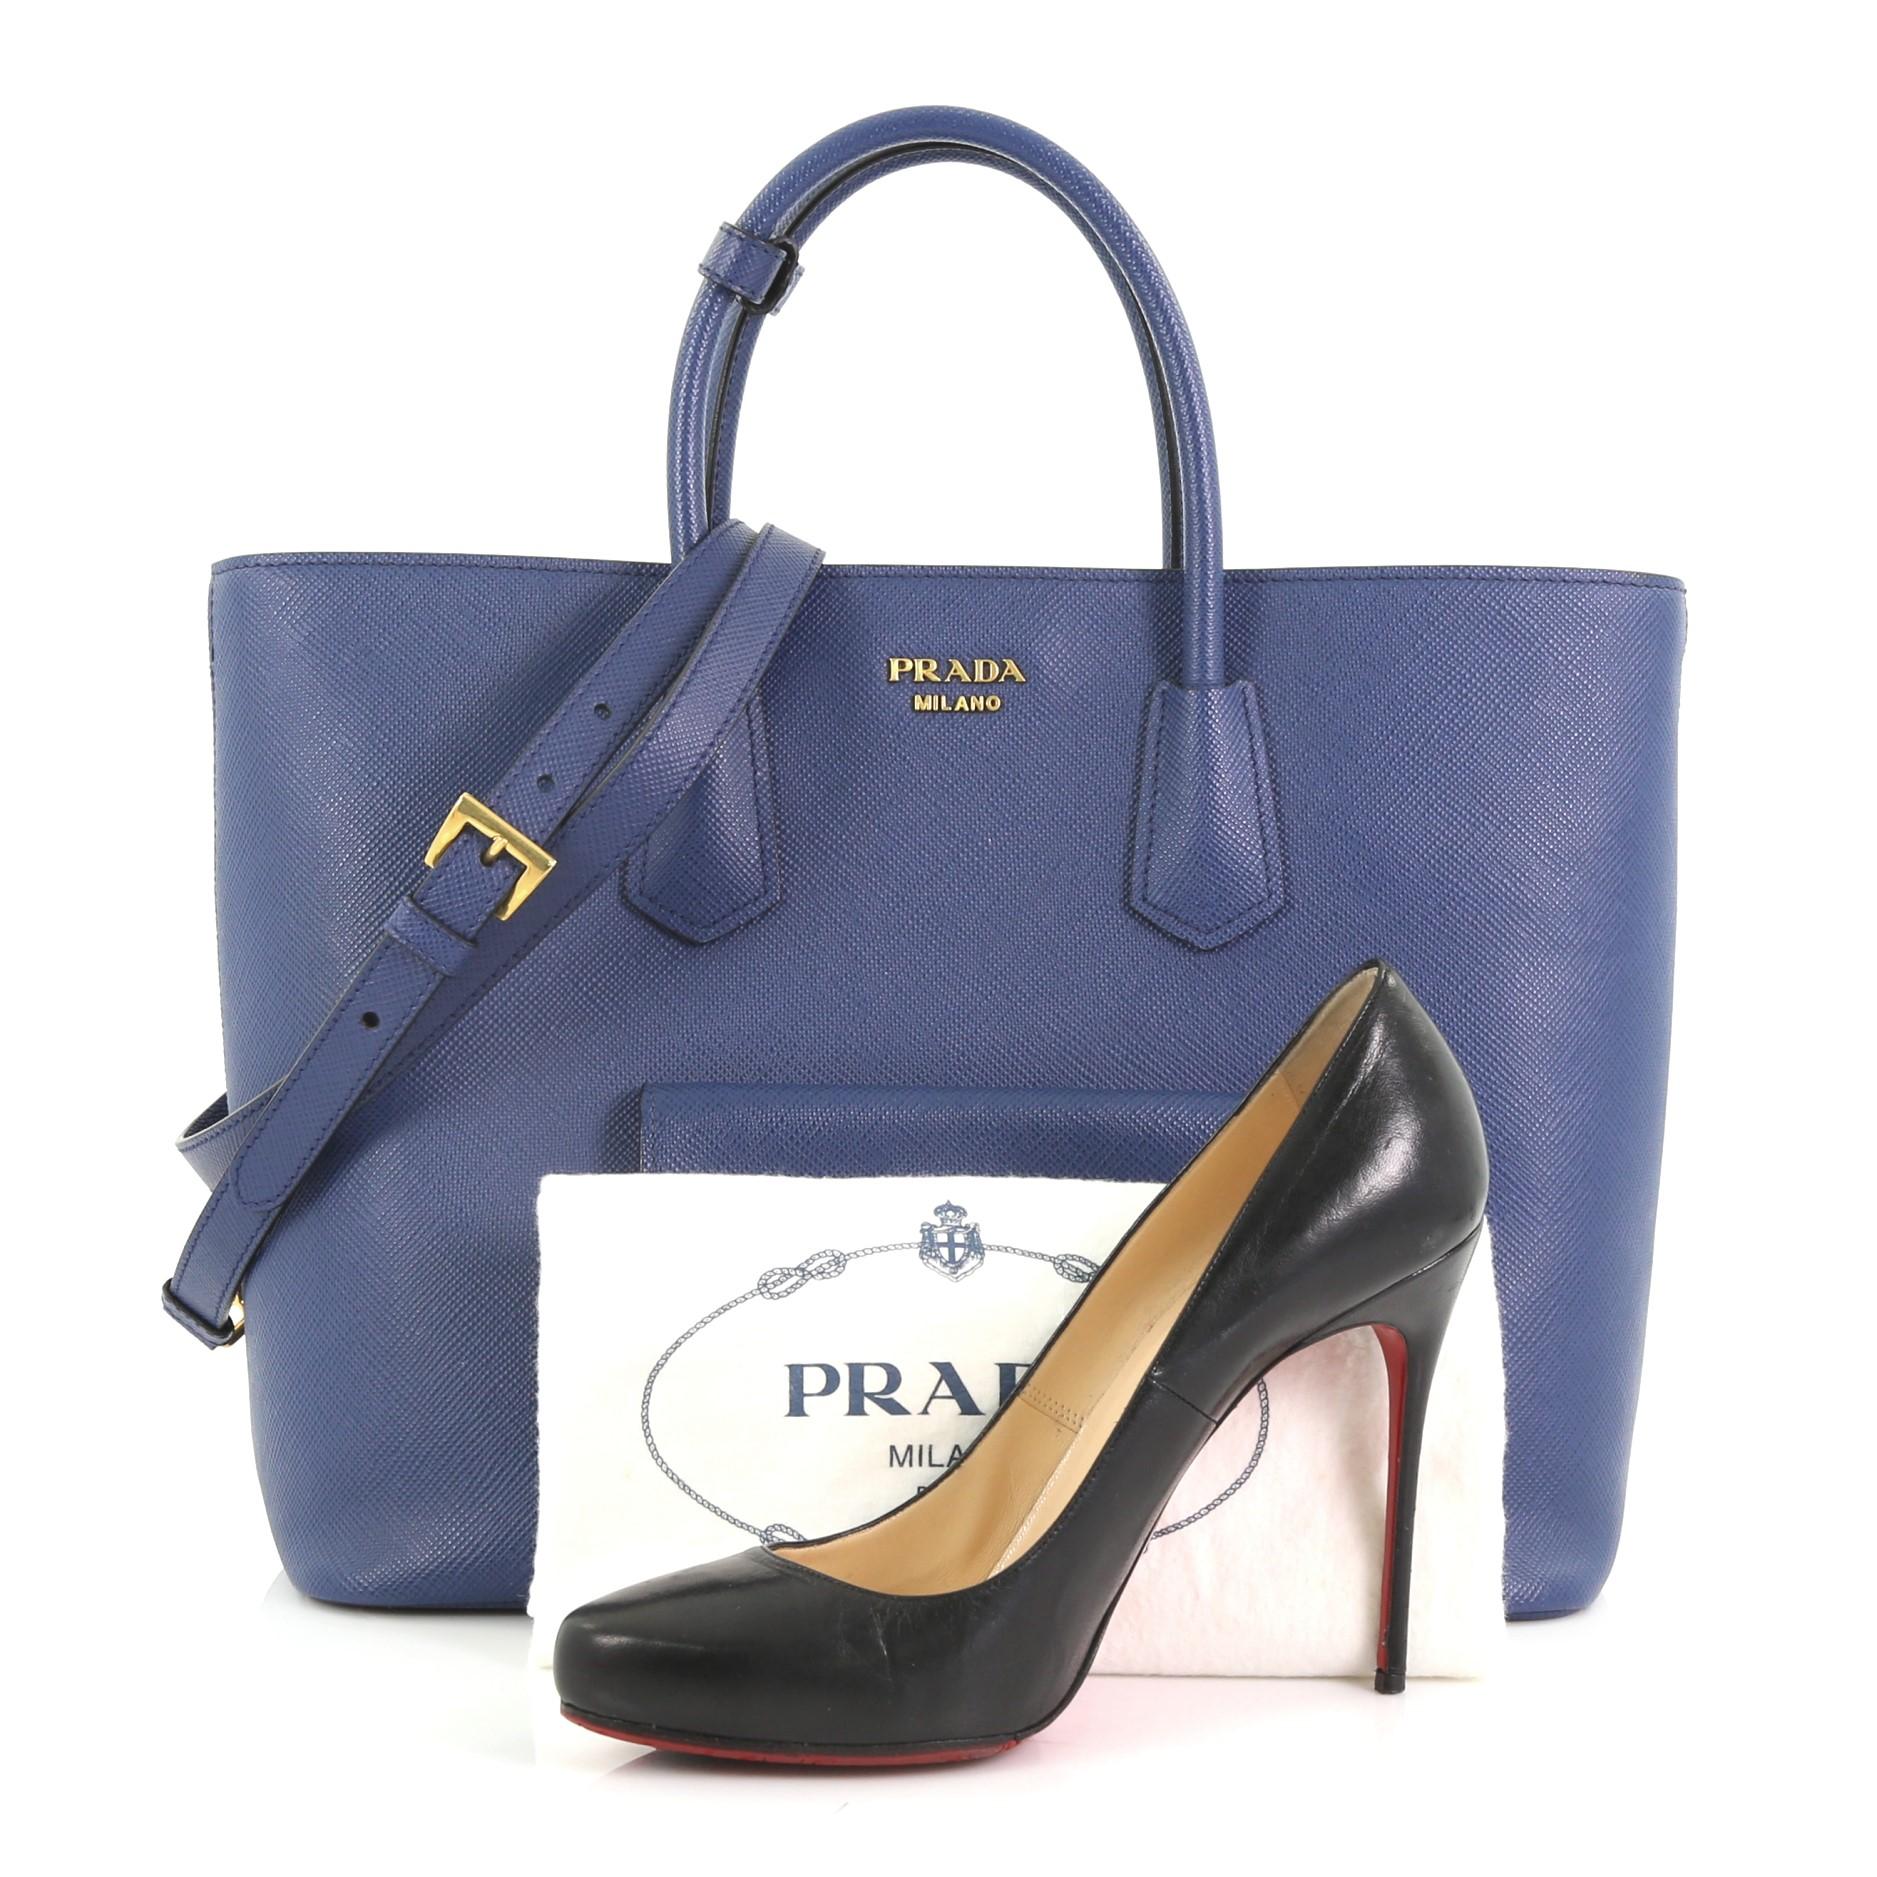 This Prada Front Pocket Convertible Tote Saffiano Leather, crafted from blue saffiano leather, features dual rolled top handles, exterior front snap pockets, and gold-tone hardware. Its snap button closure opens to a blue leather interior with side